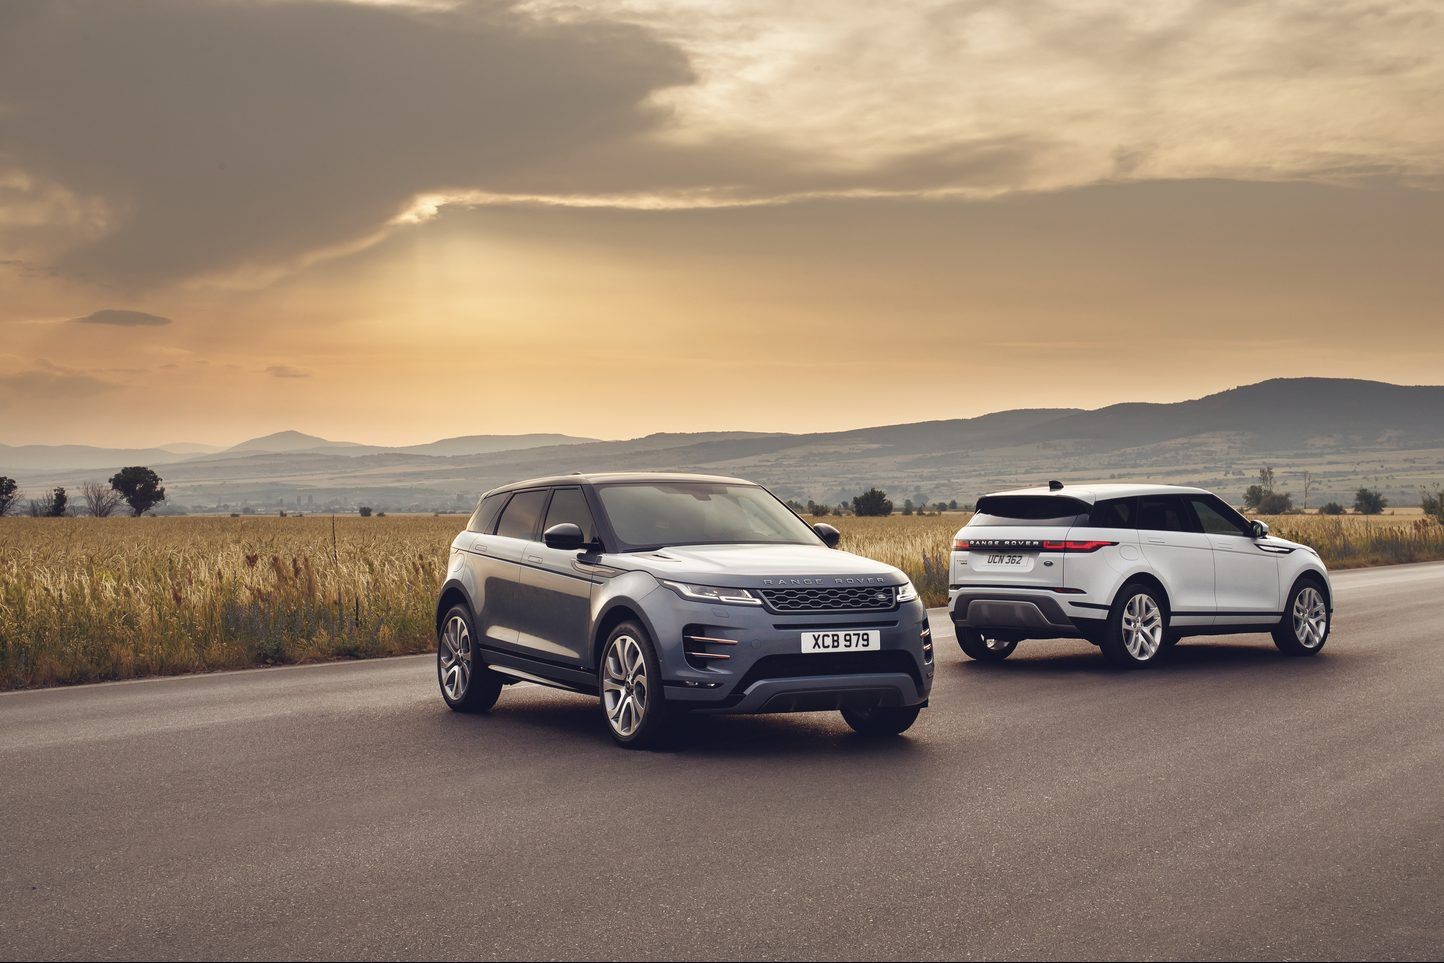 The 2022 Range Rover Evoque: Advanced Engineering Inside and Out